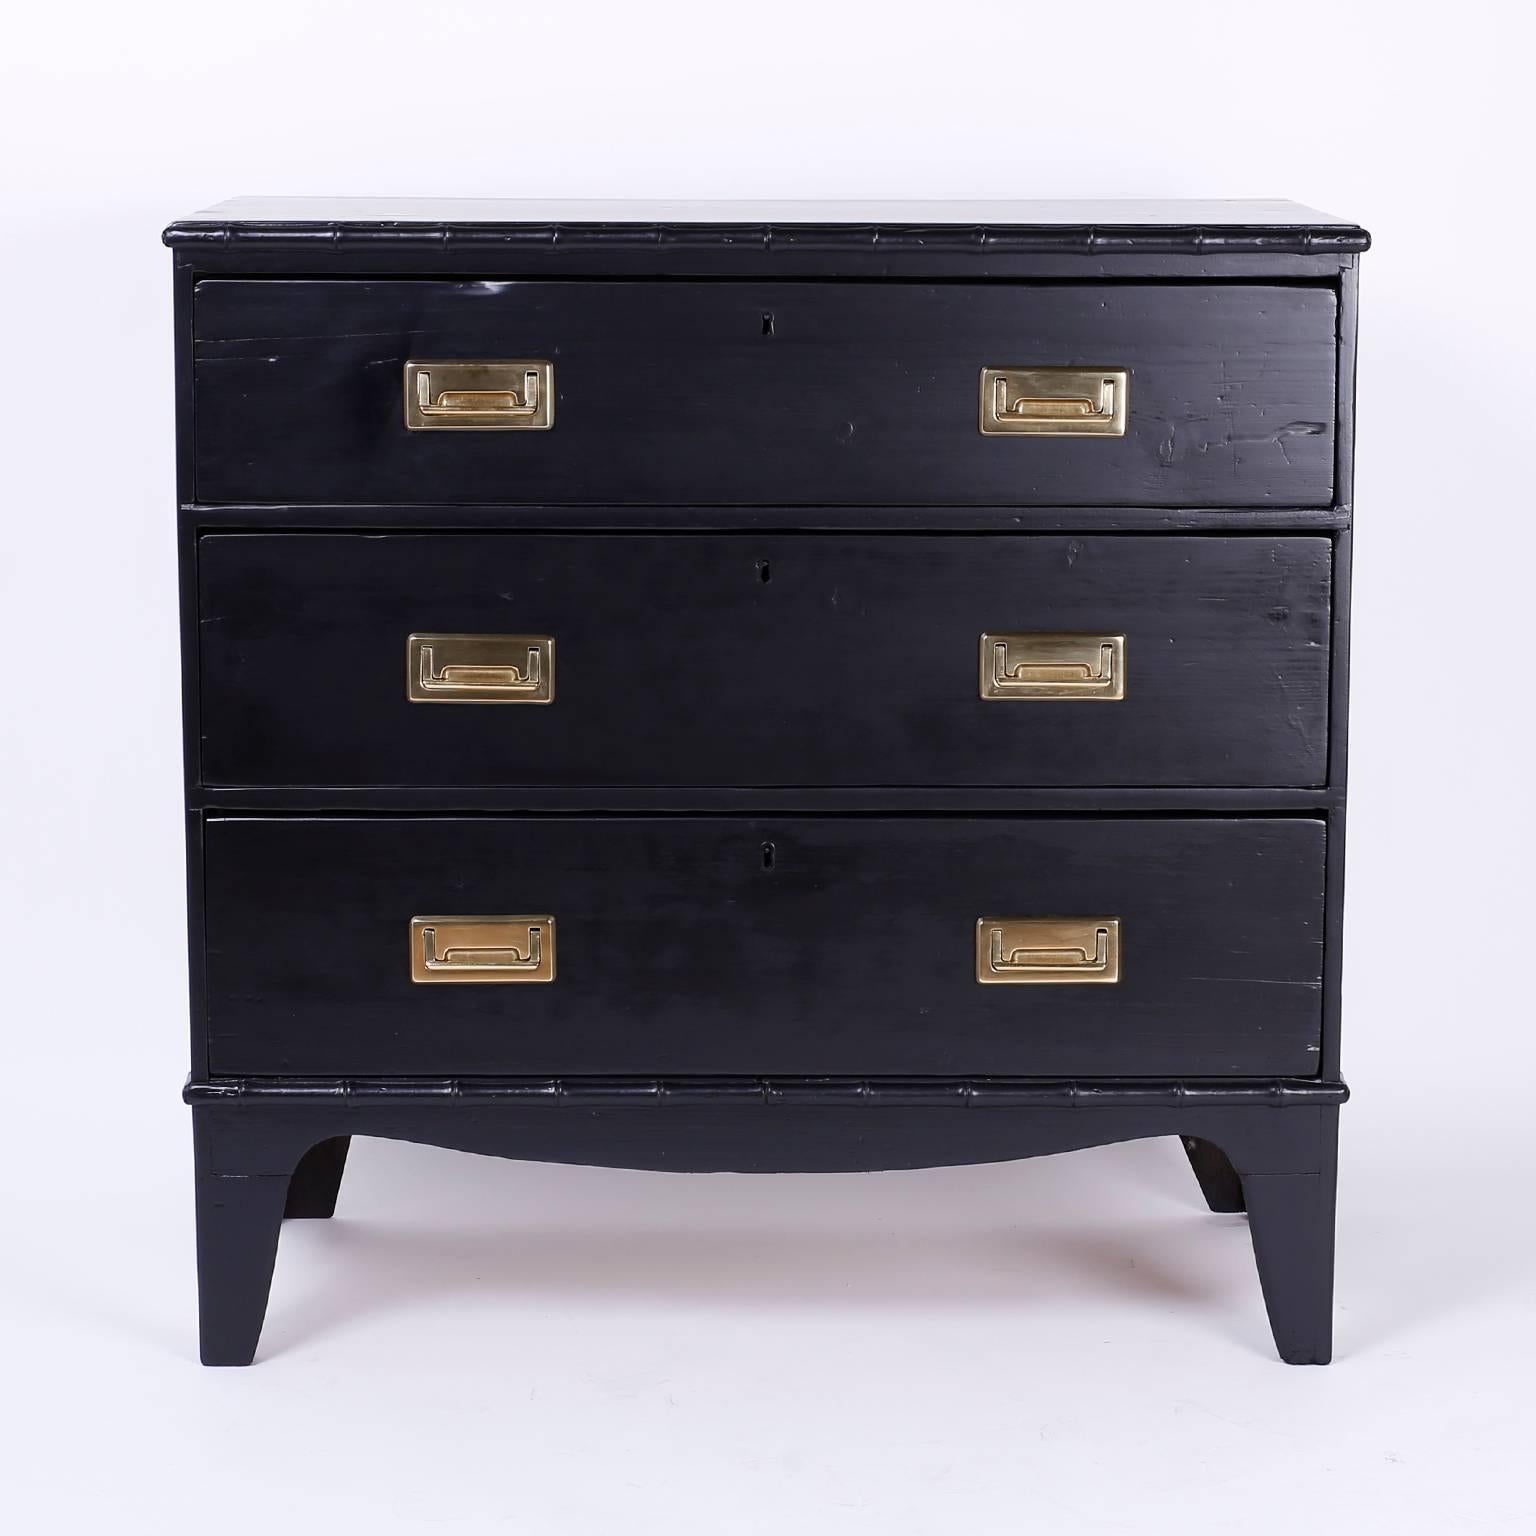 English 19th C. Ebonized Finish Campaign Style Chest of Drawers with Faux Bamboo Trim